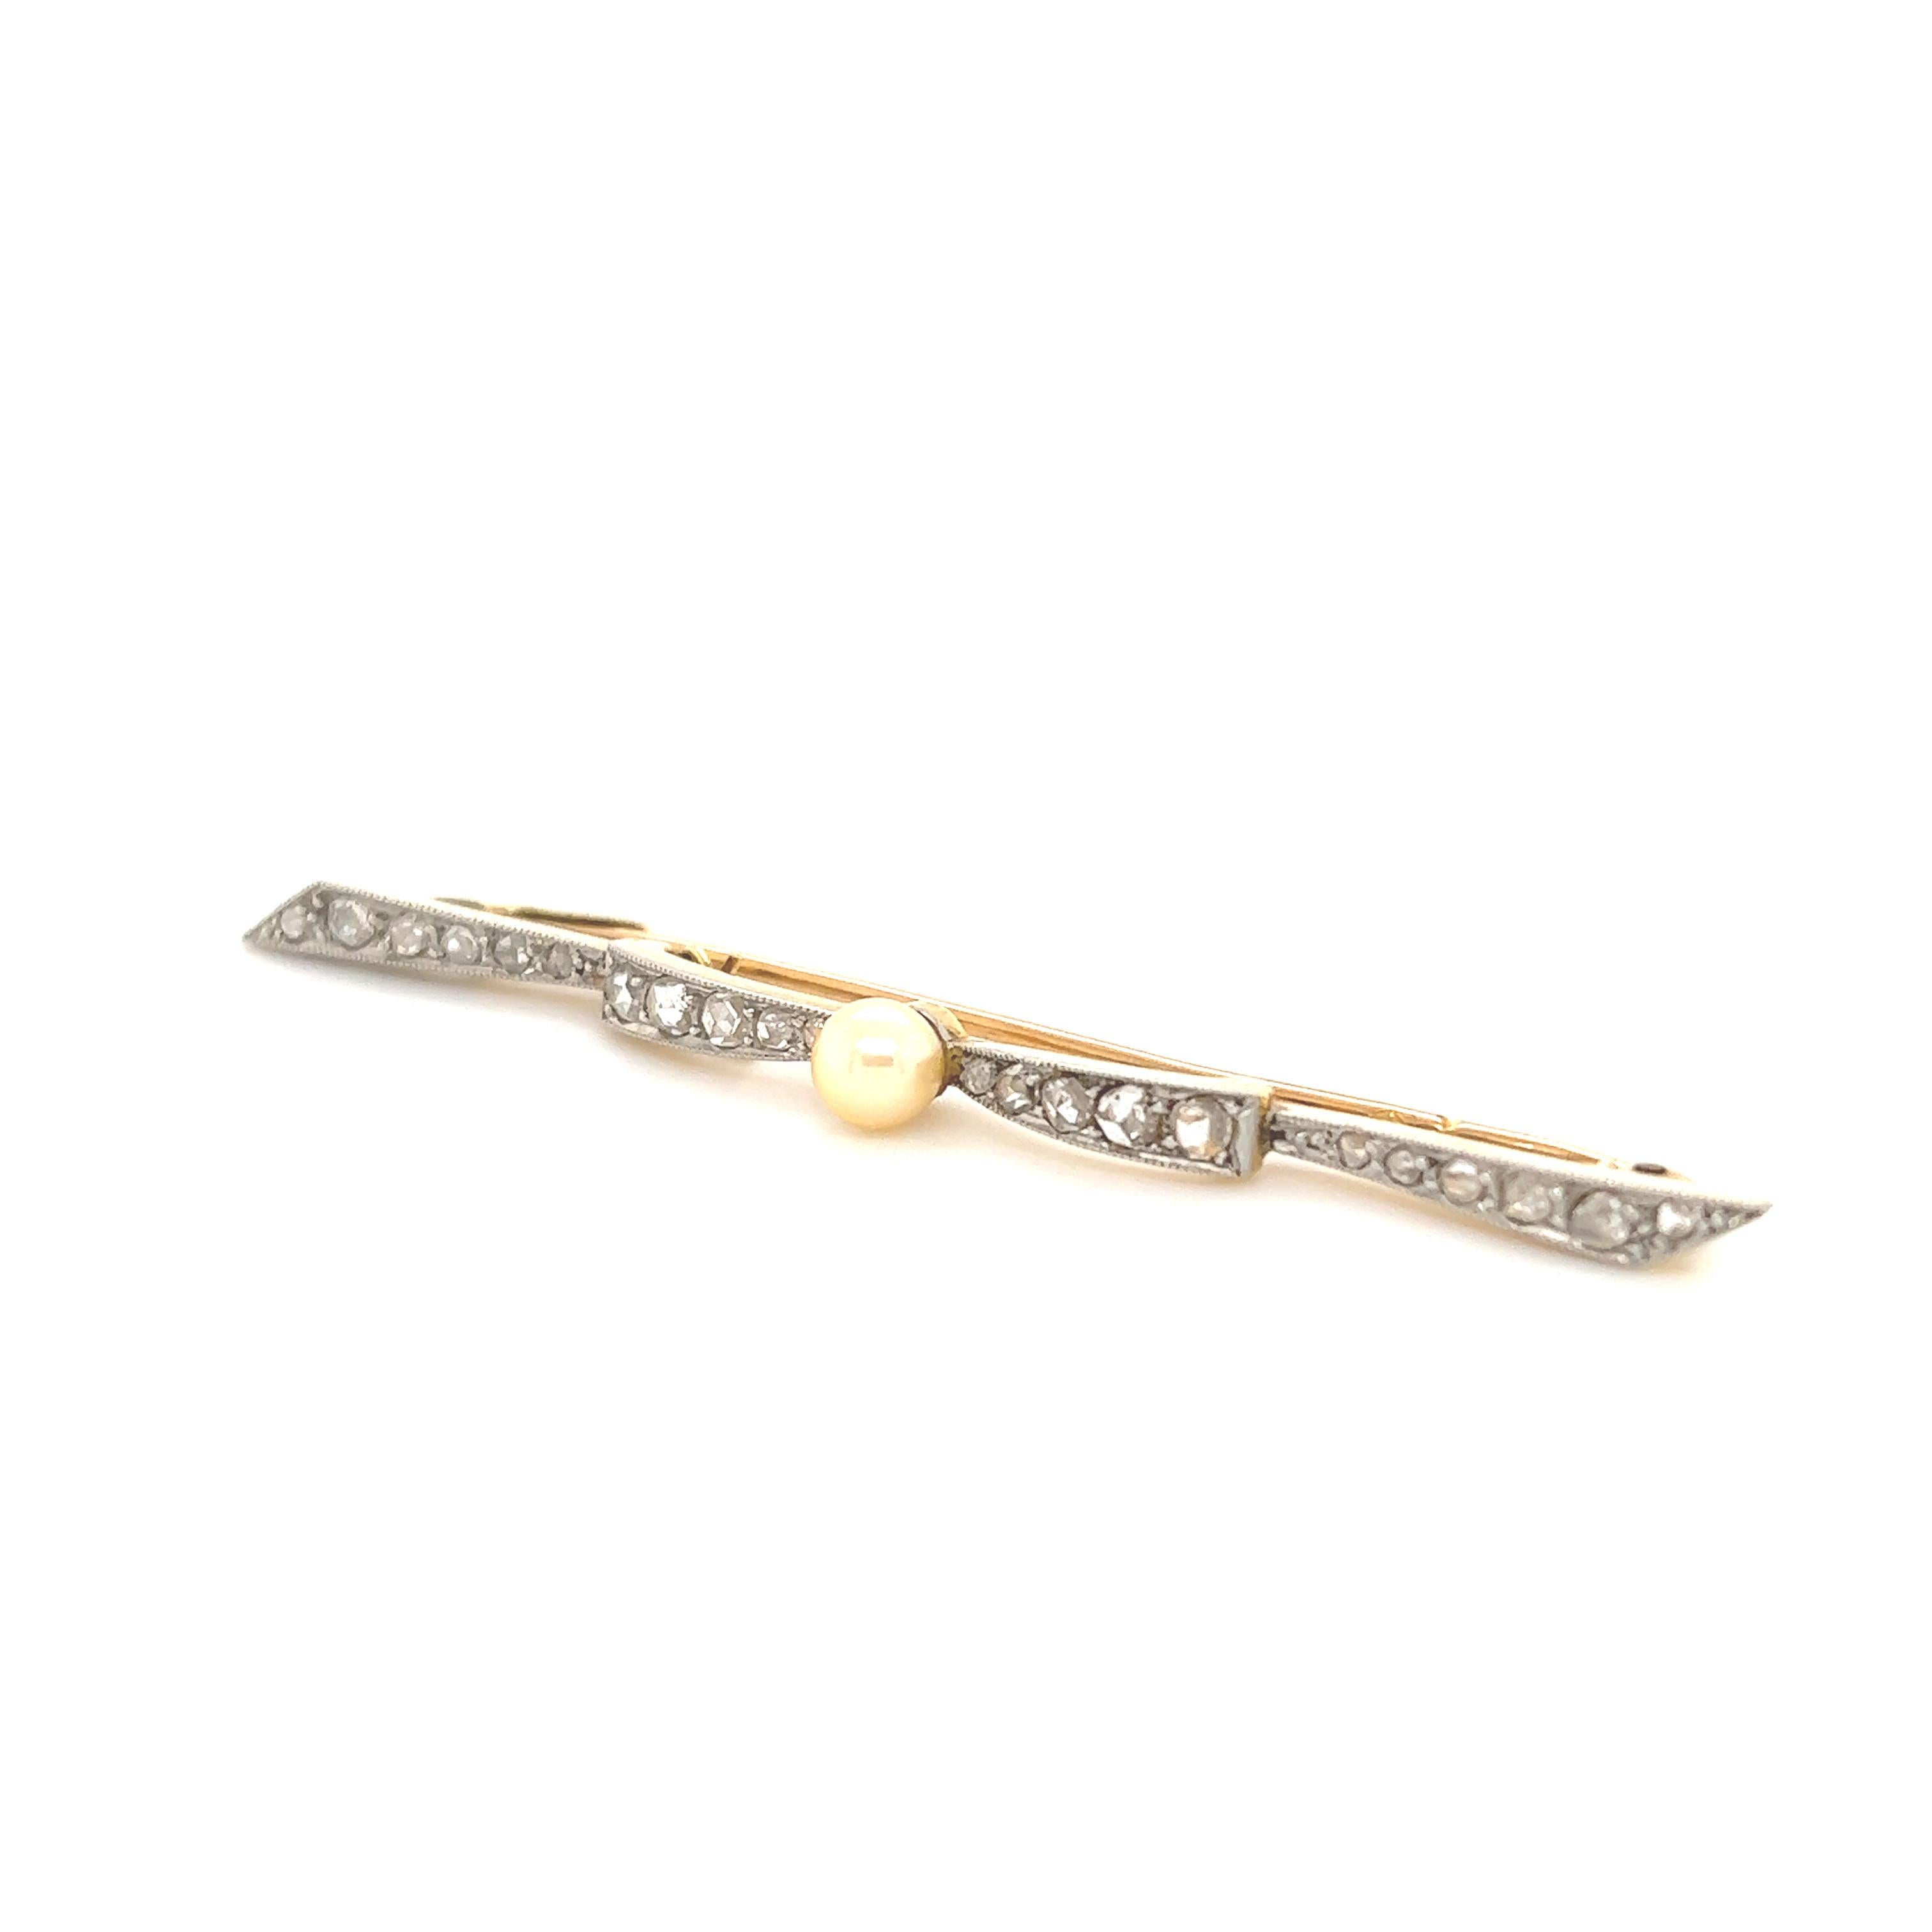 Delicately crafted over 120 years ago this pin is truly a stand out item. This beautiful creation measures 2.25